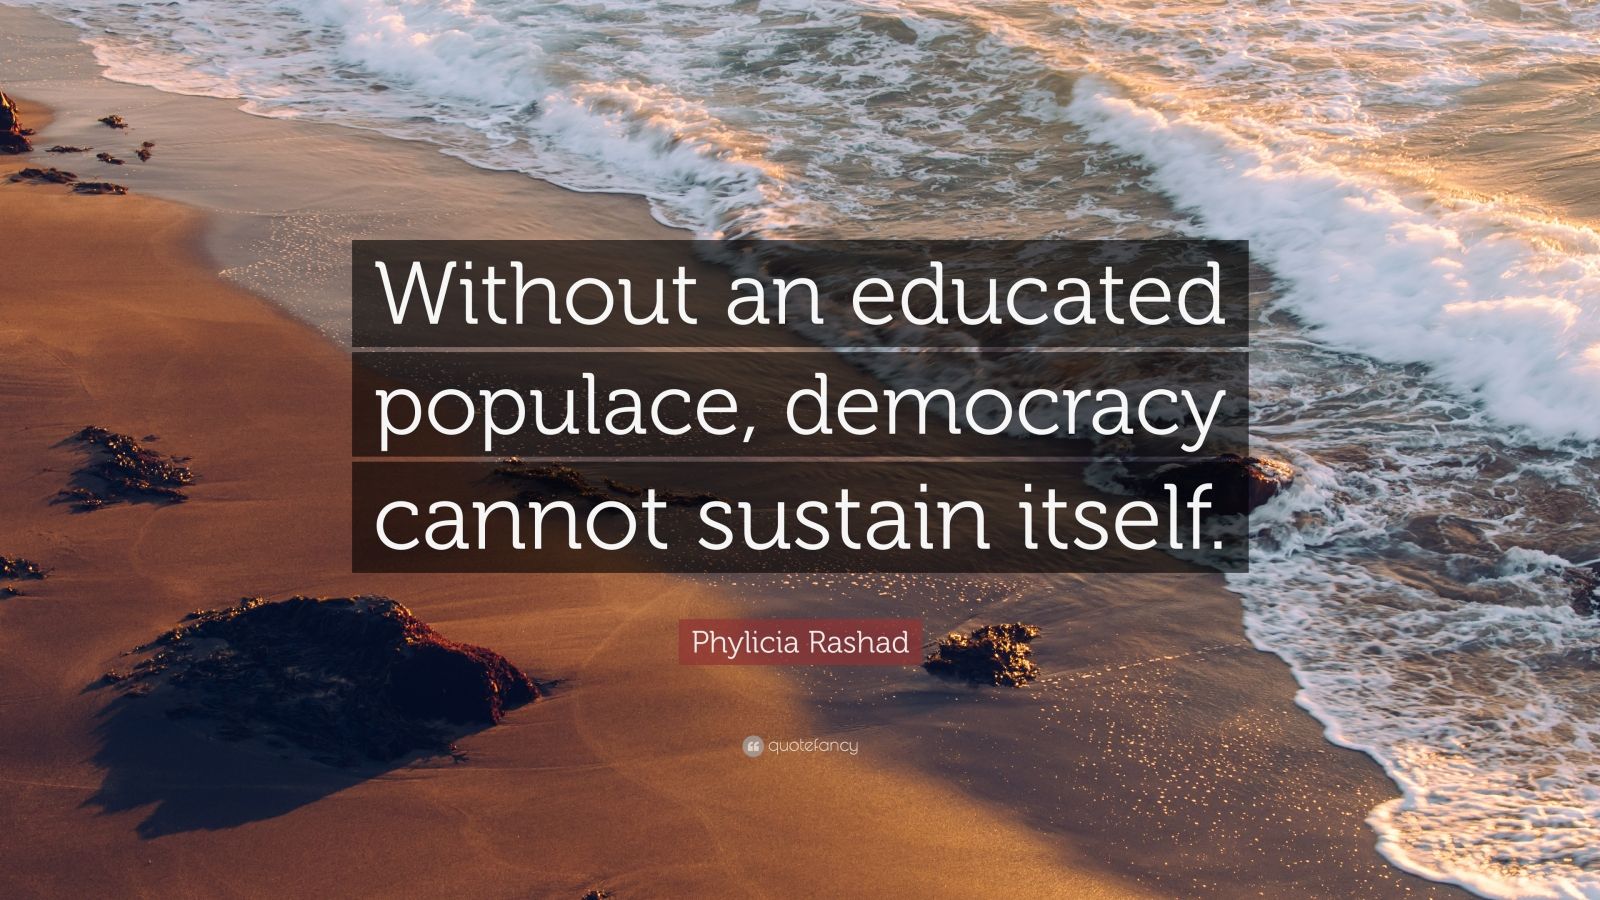 an essay on democracy cannot survive without education